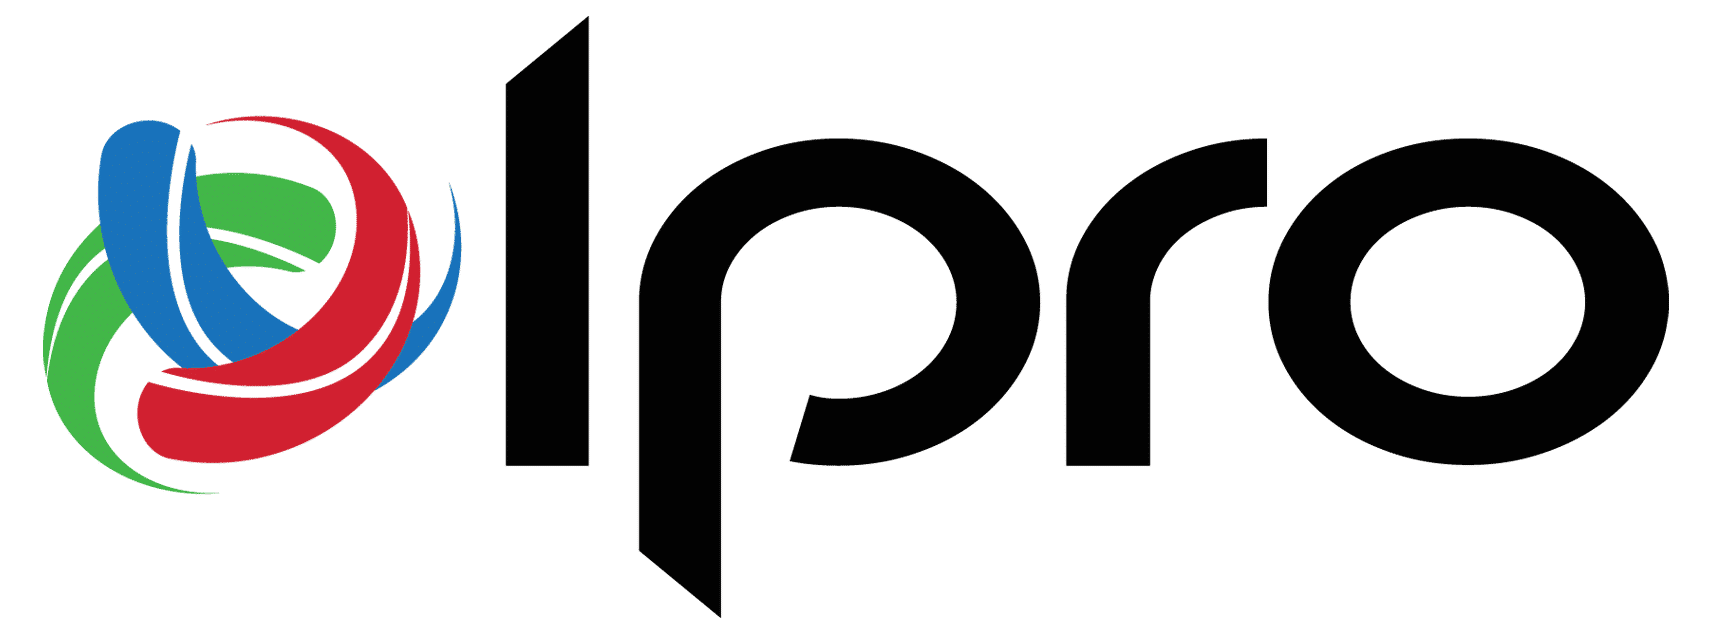 Ipro for Enterprise - eDiscovery Software